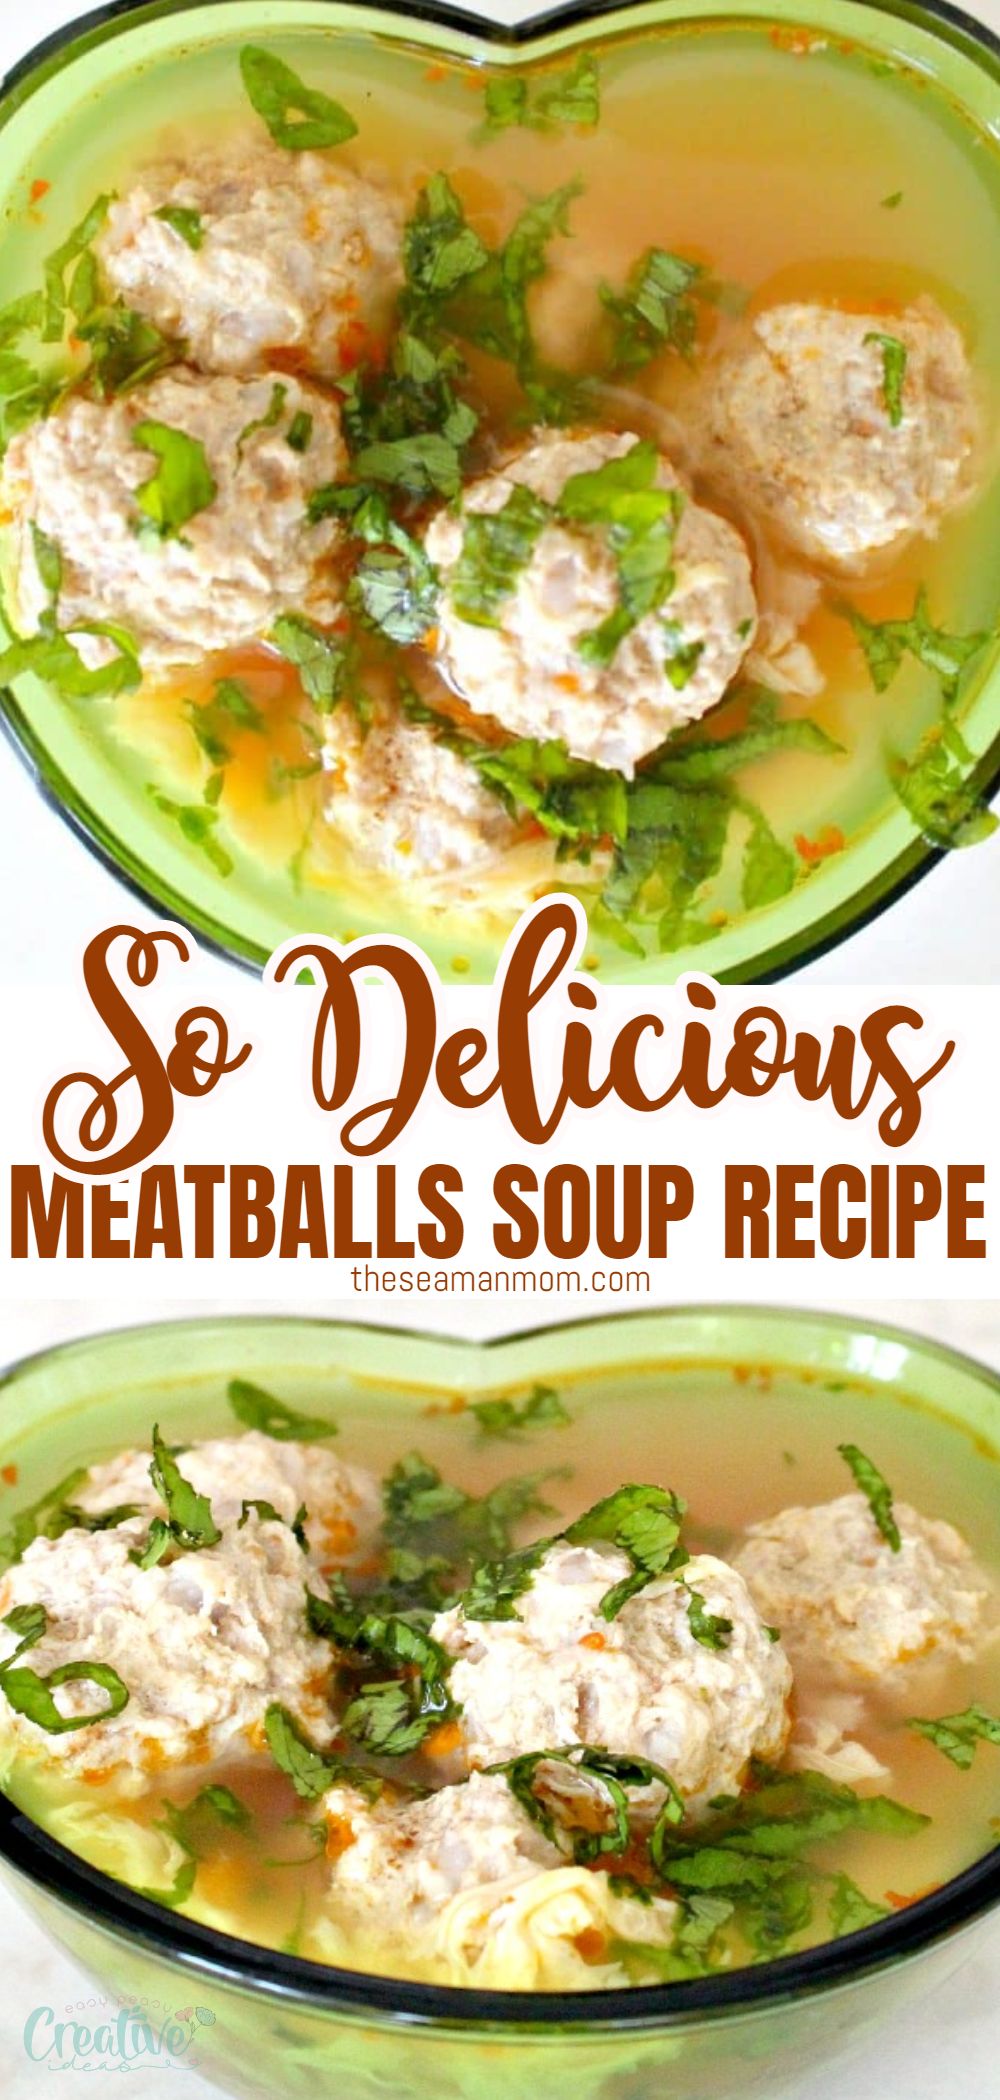 This meatballs soup recipe is a nice, comforting soup that has been soured with a generous shot of fresh lemon juice or homemade borsch. Pork and rice meatballs bring so much savory flavor and substance to the simple base of vegetable broth. via @petroneagu